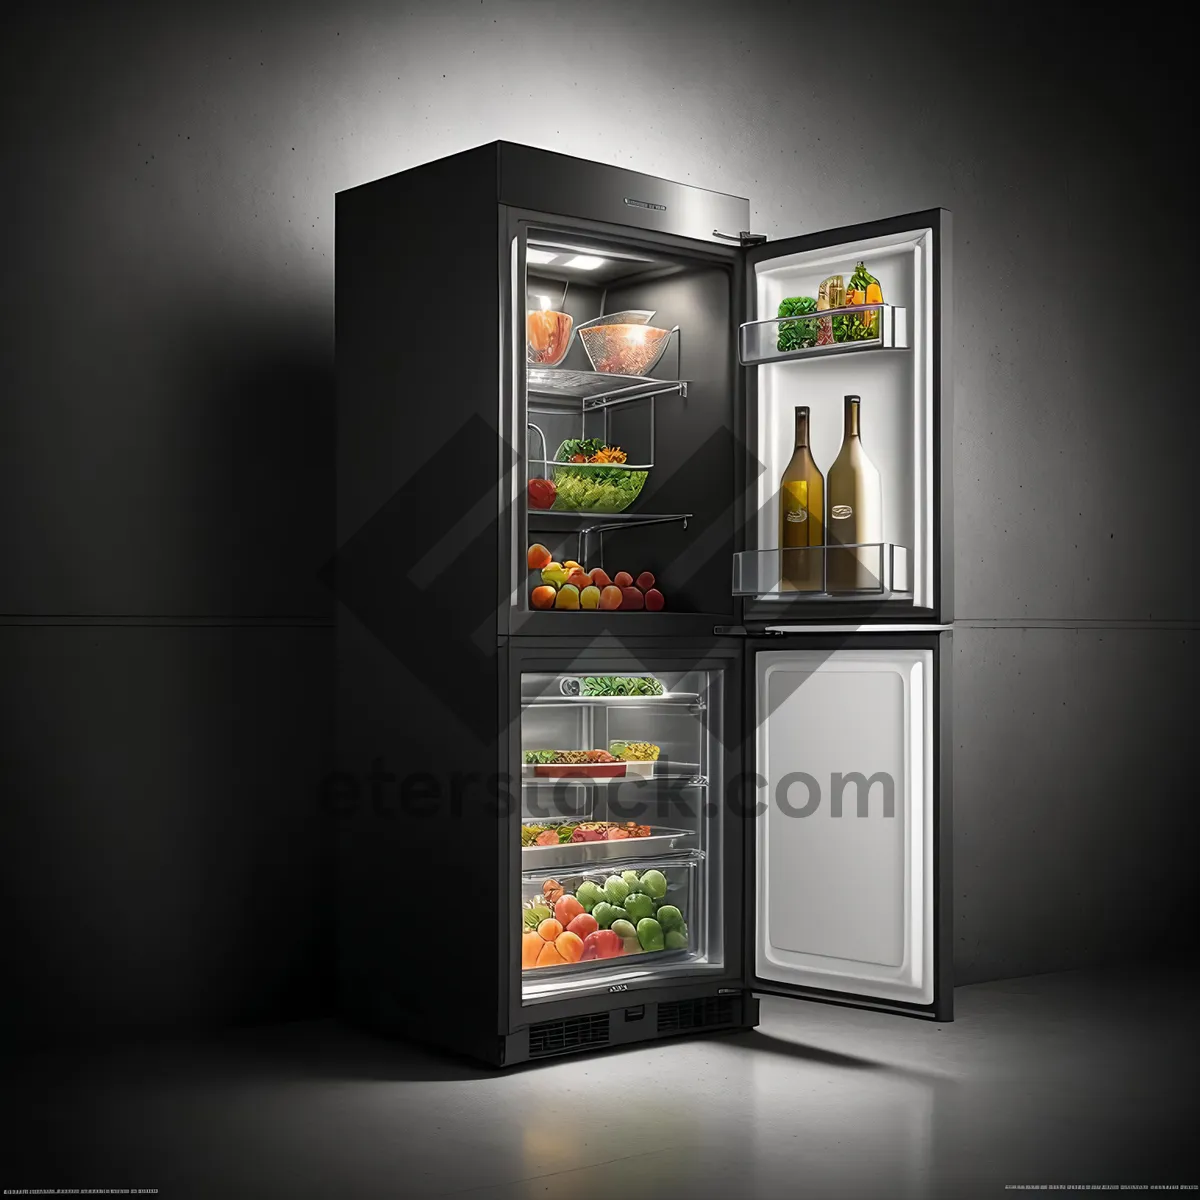 Picture of Modern Refrigeration Machine: Sleek and Efficient Home Appliance